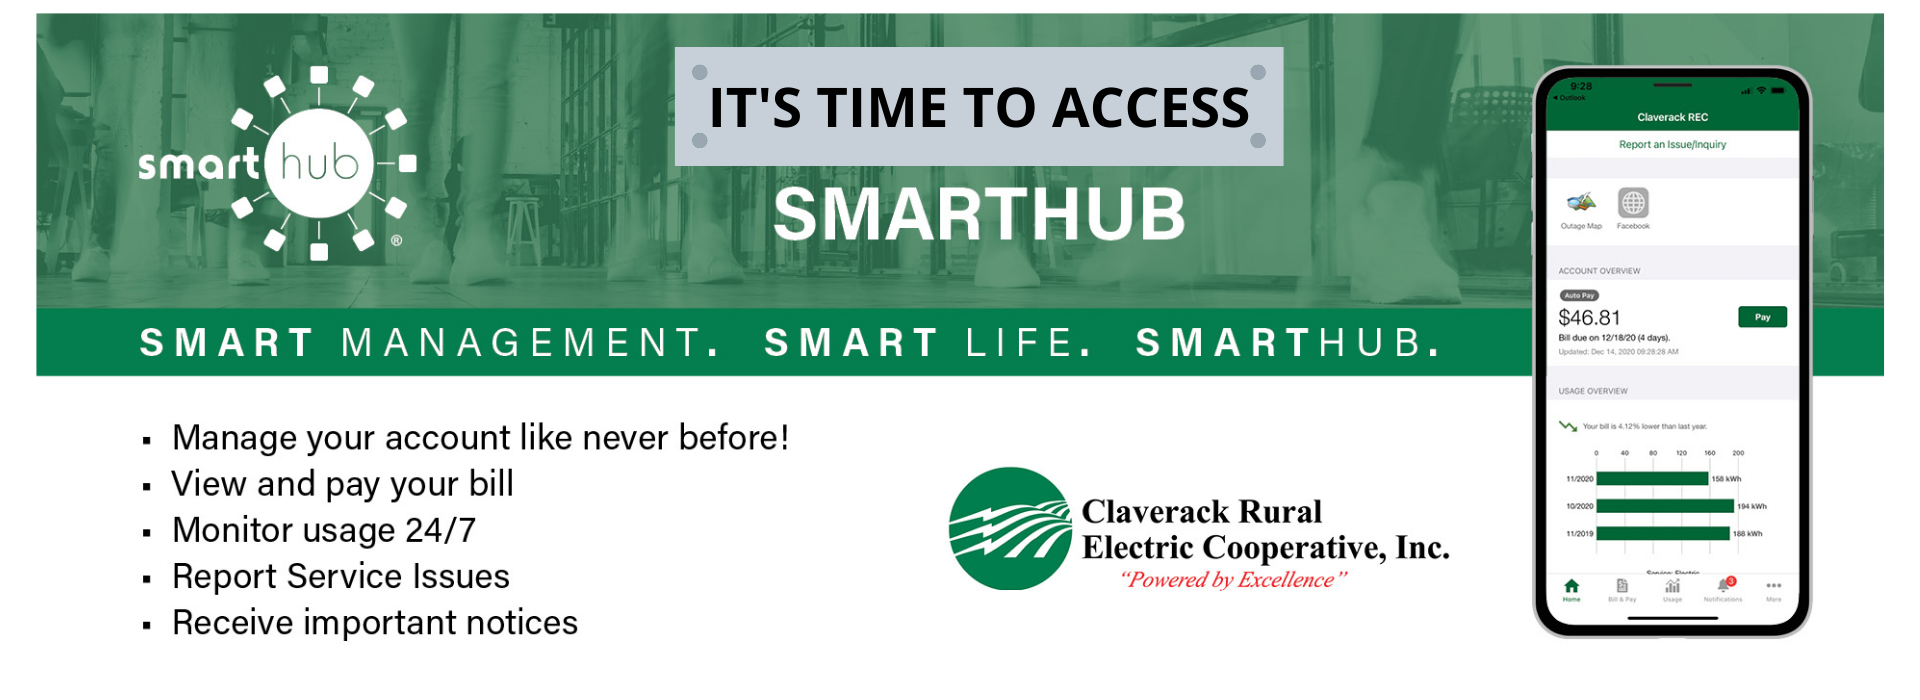 Access your account with SmartHub today